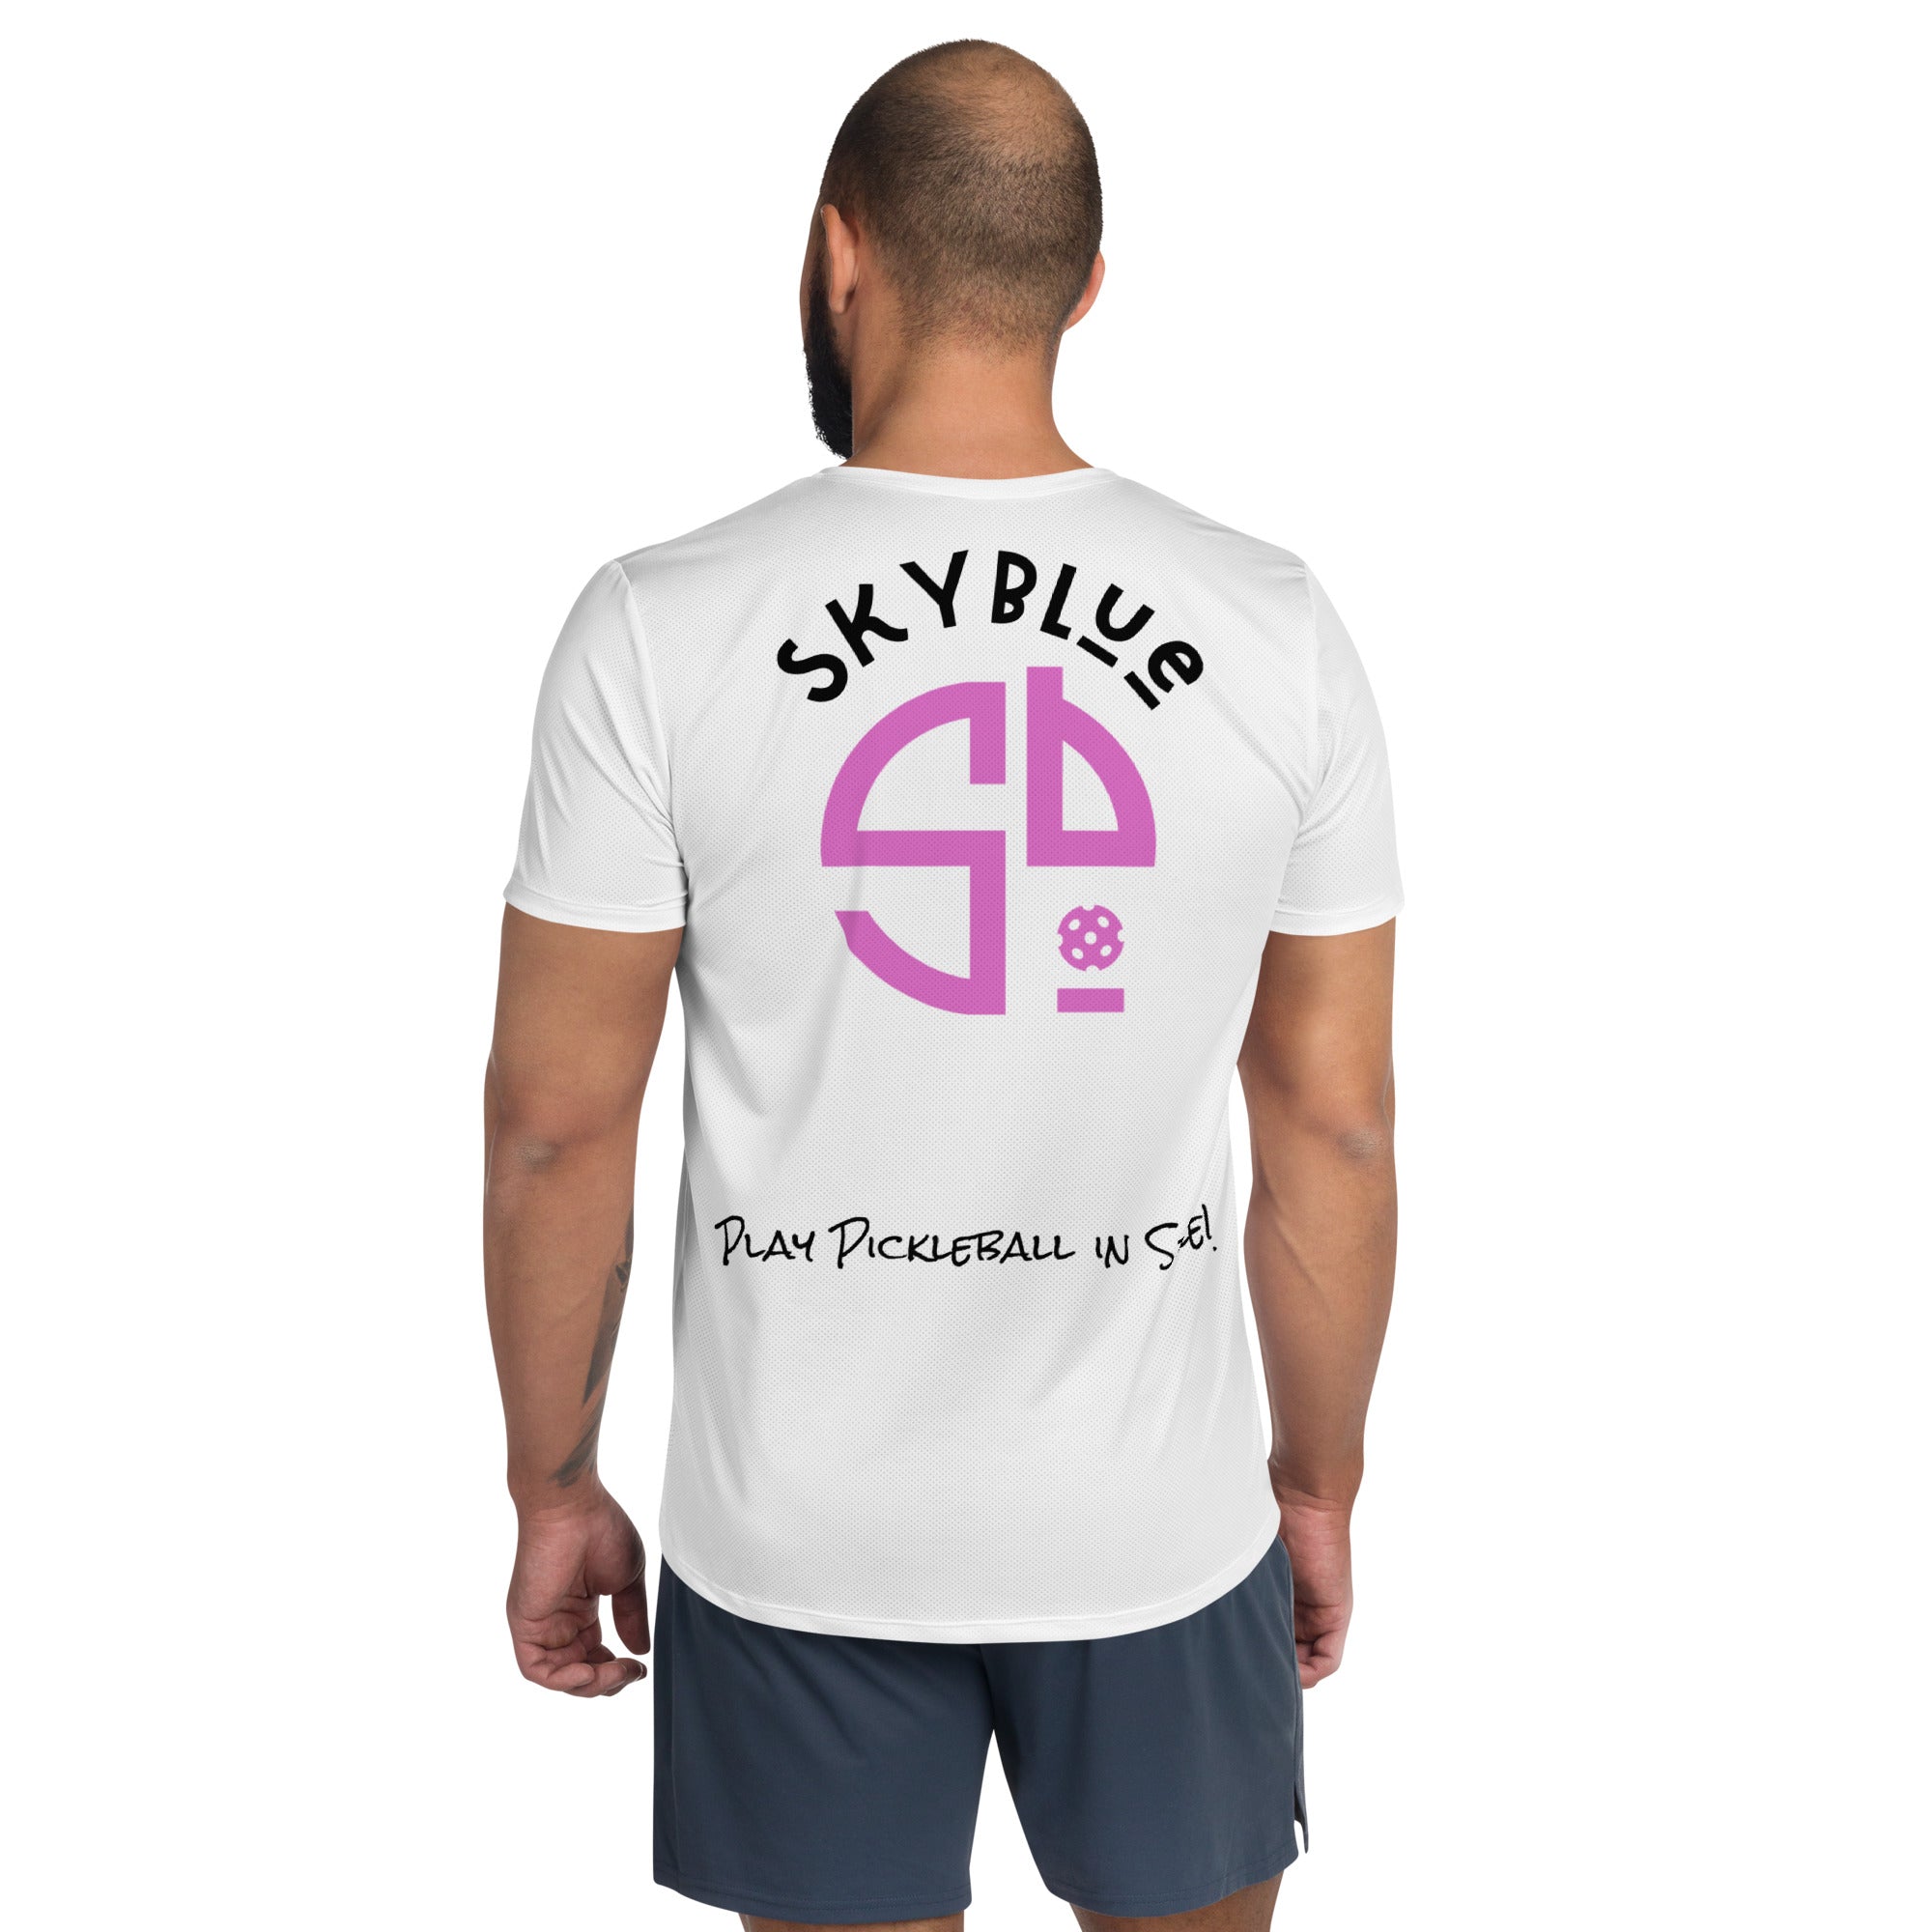 SKYblue™ Pickleball White Performance Fabric Shirt for Men, Accent Pink and Blue!